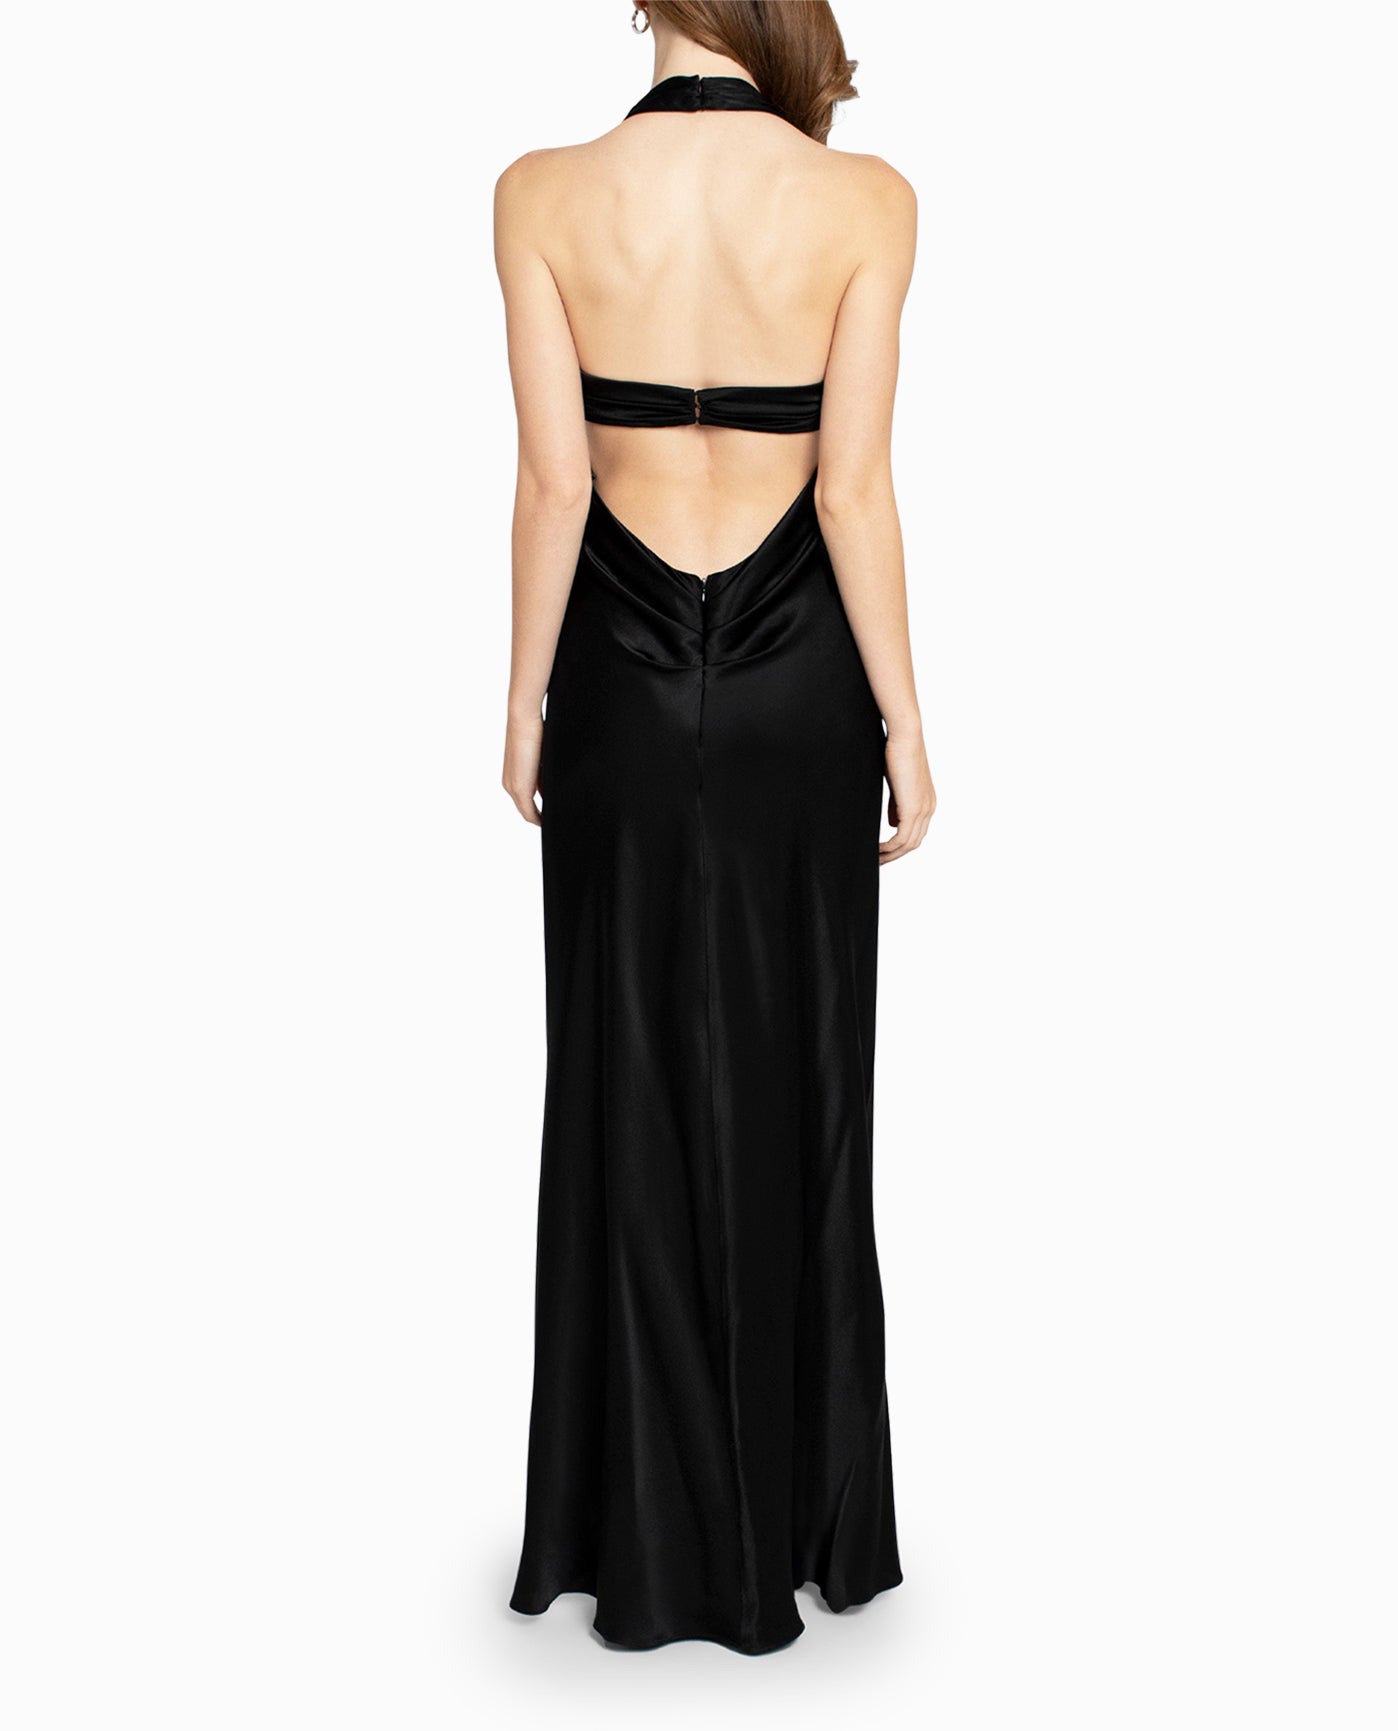 BACK OF CUT OUT GOWN | BLACK